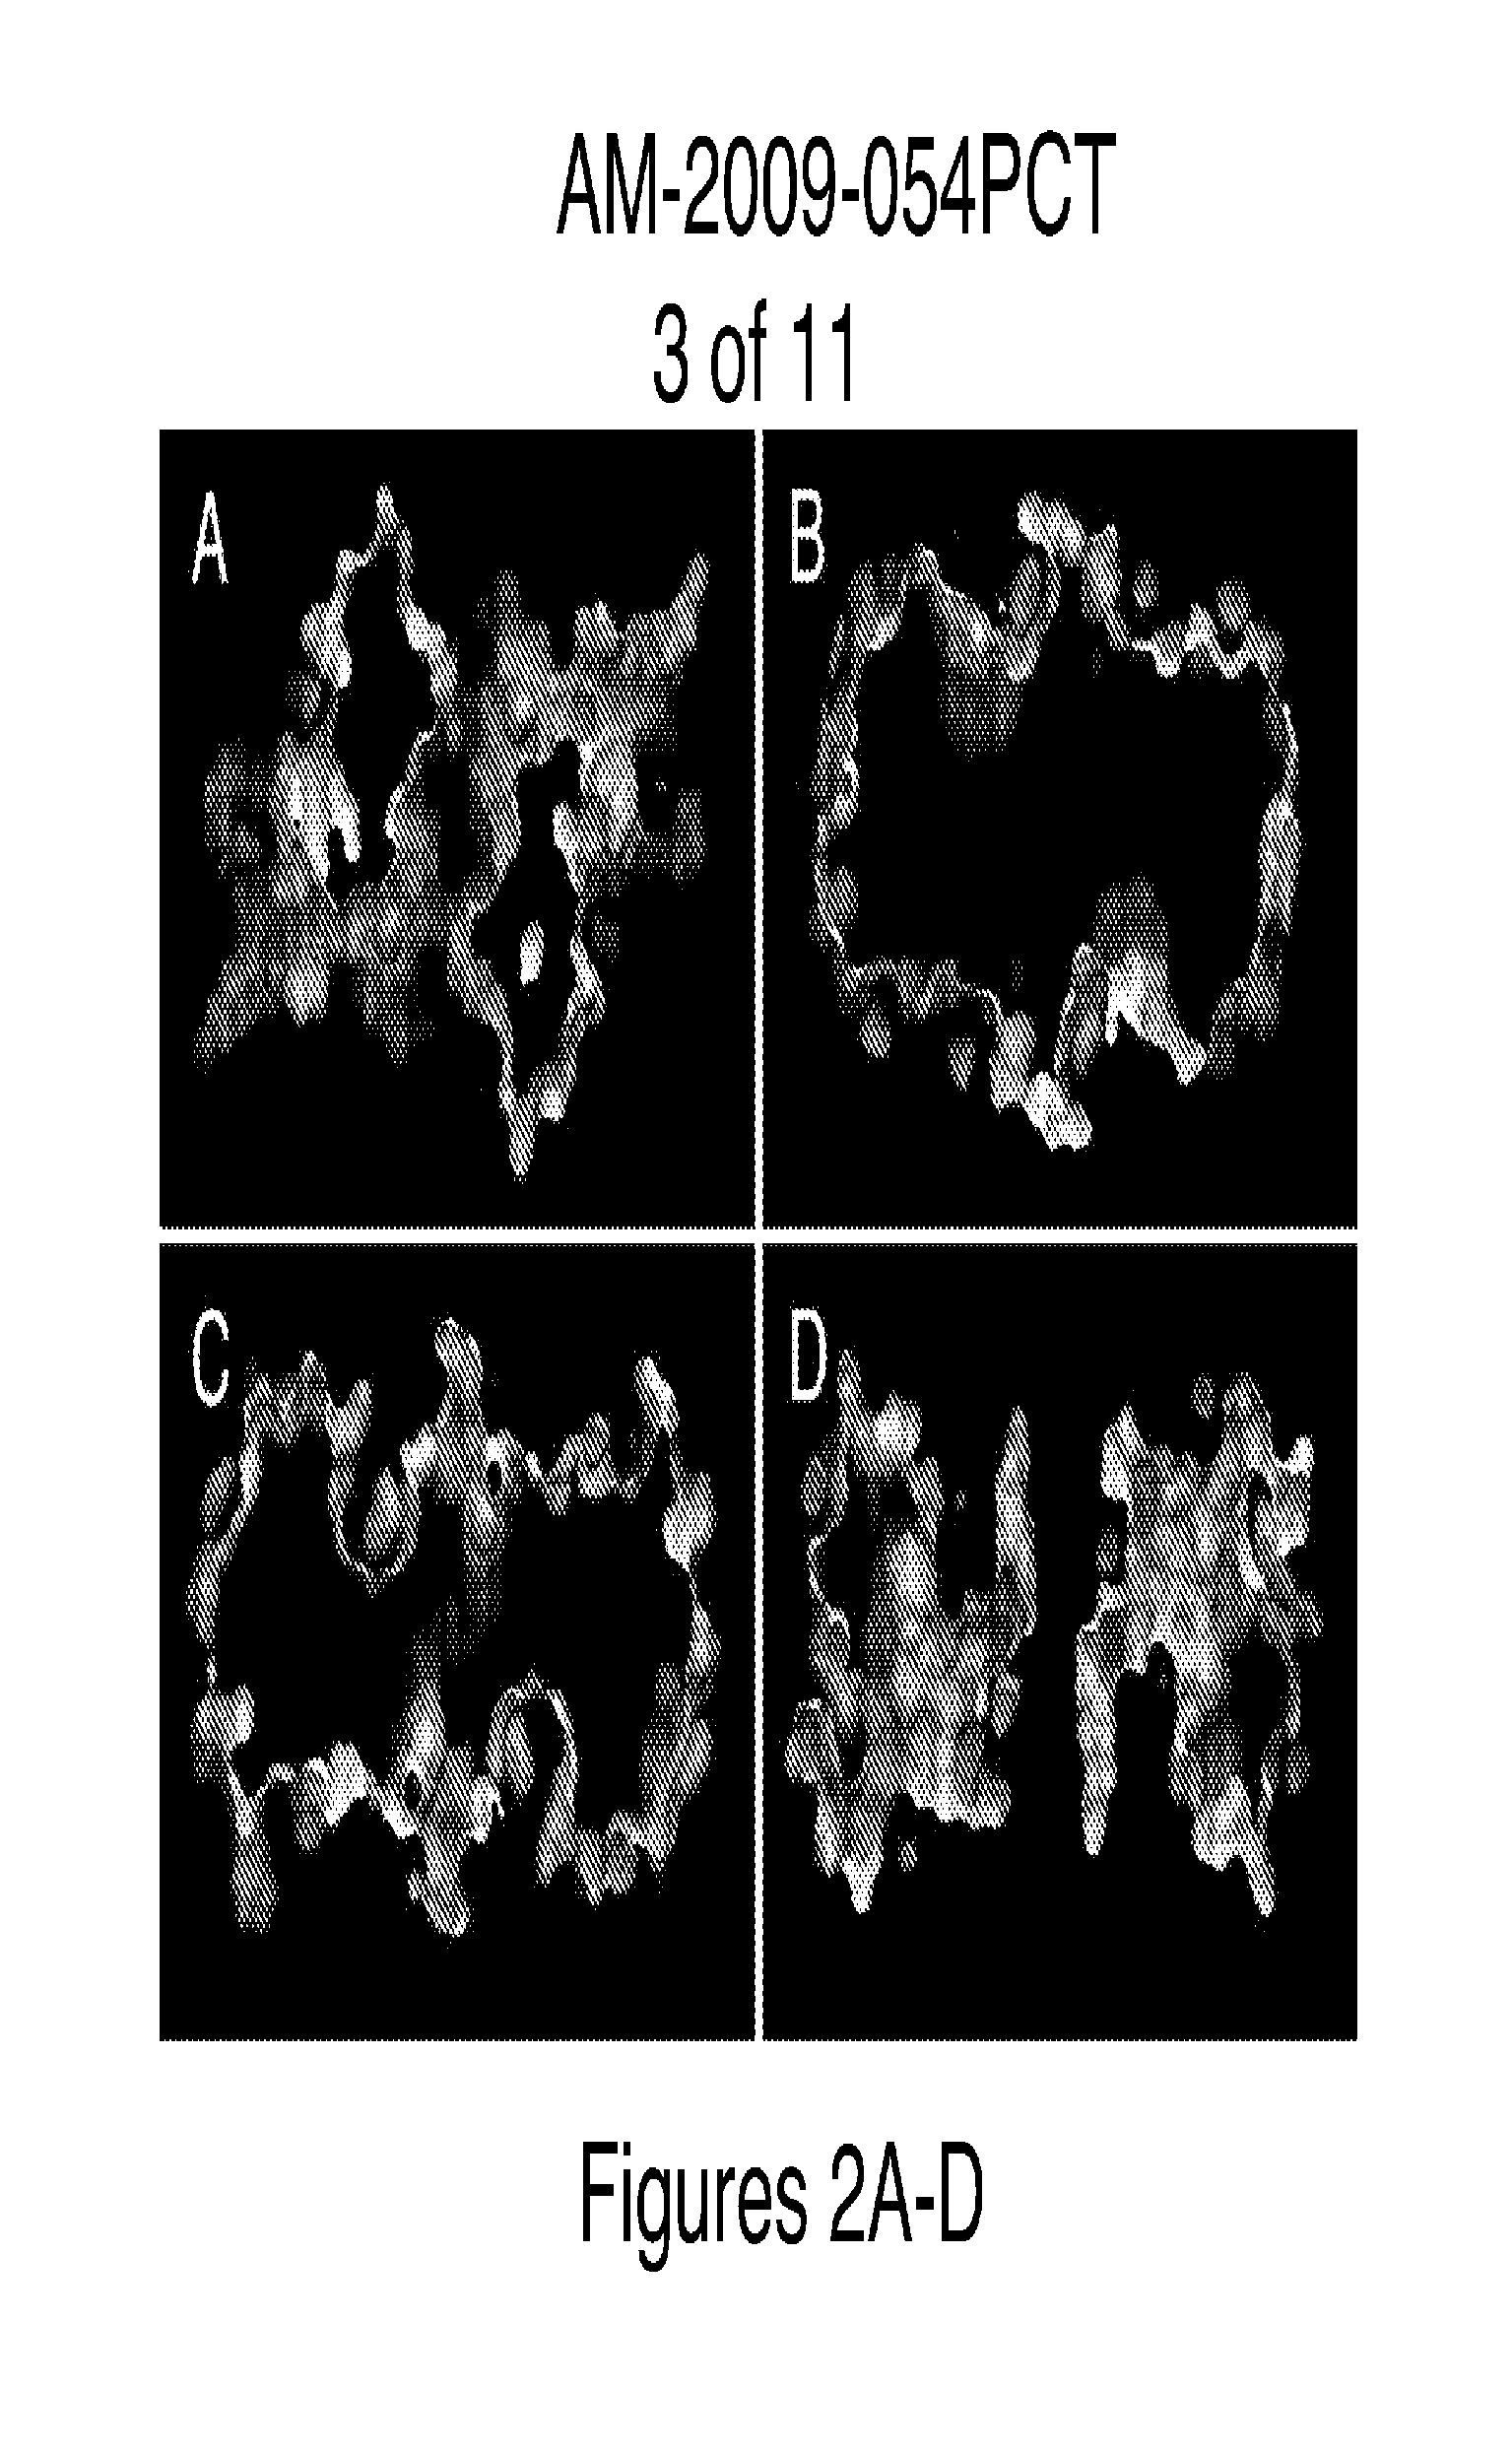 Method for binding site identification by molecular dynamics simulation (silcs: site identification by ligand competitive saturation)